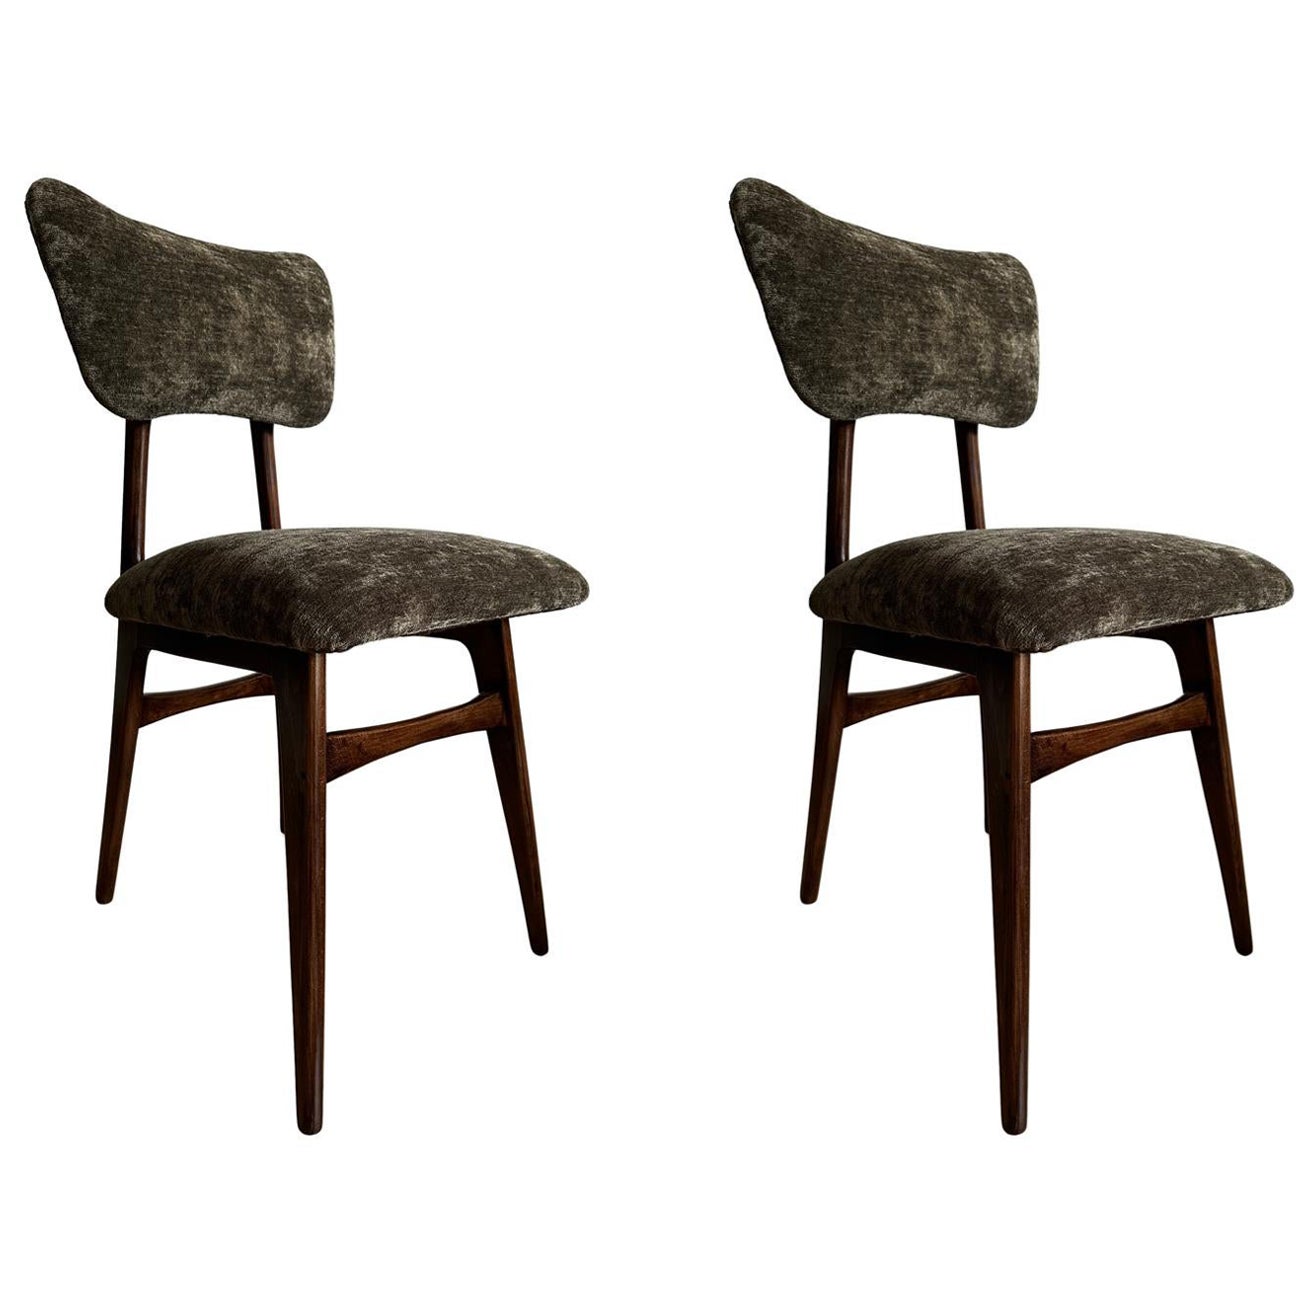 Set of Two Midcentury Dining Chairs in Green Velvet Upholstery, Poland, 1960s For Sale